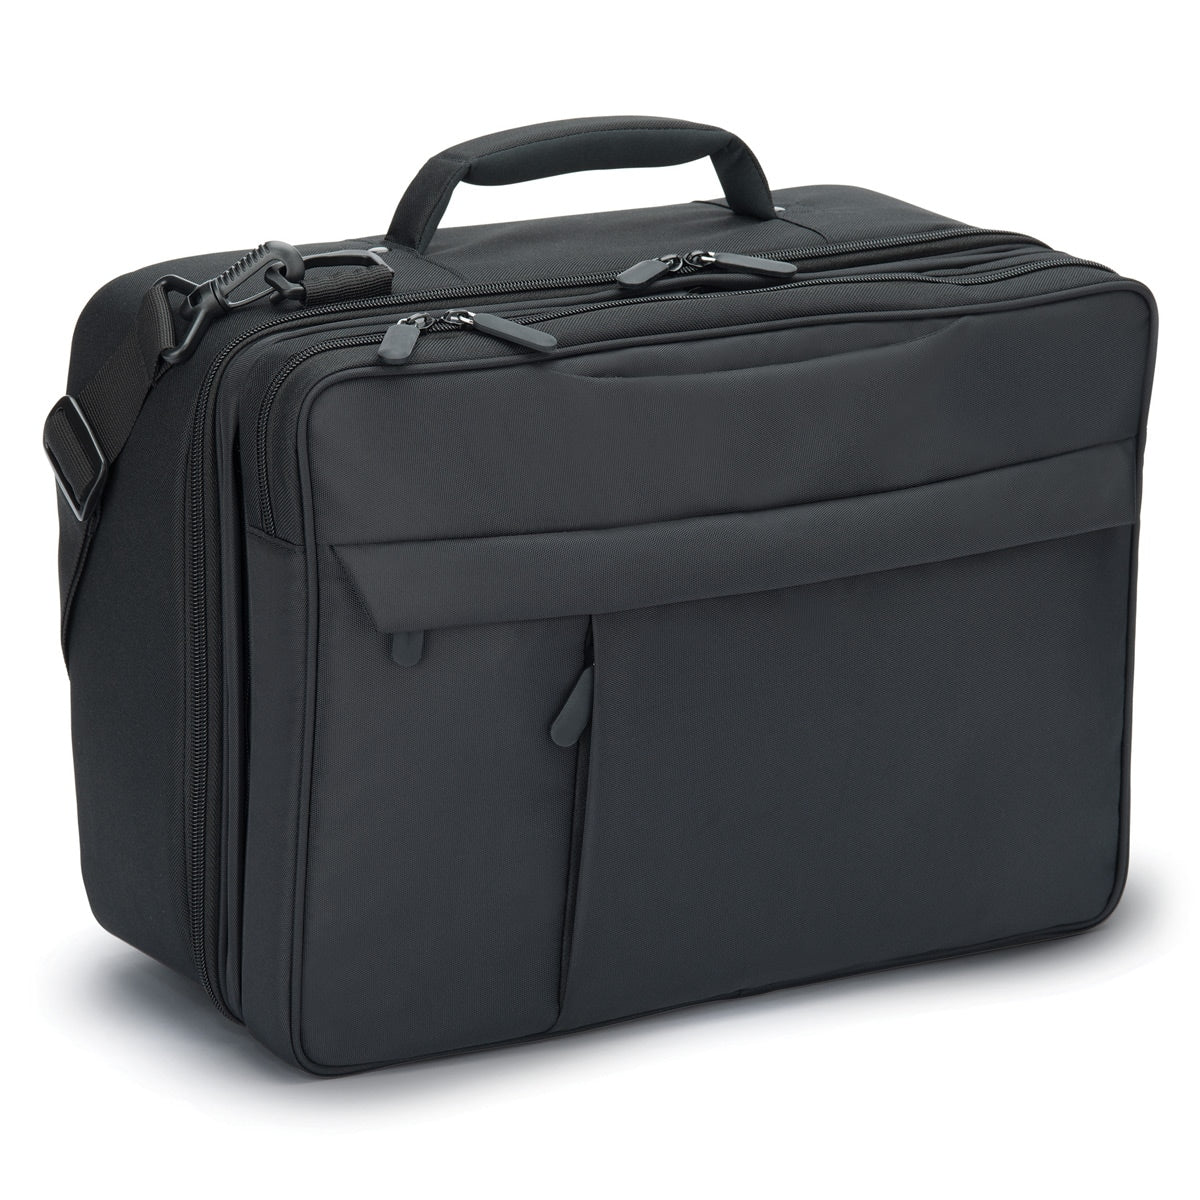 PAP Travel Bag Briefcase for CPAP/BiPAP Machines